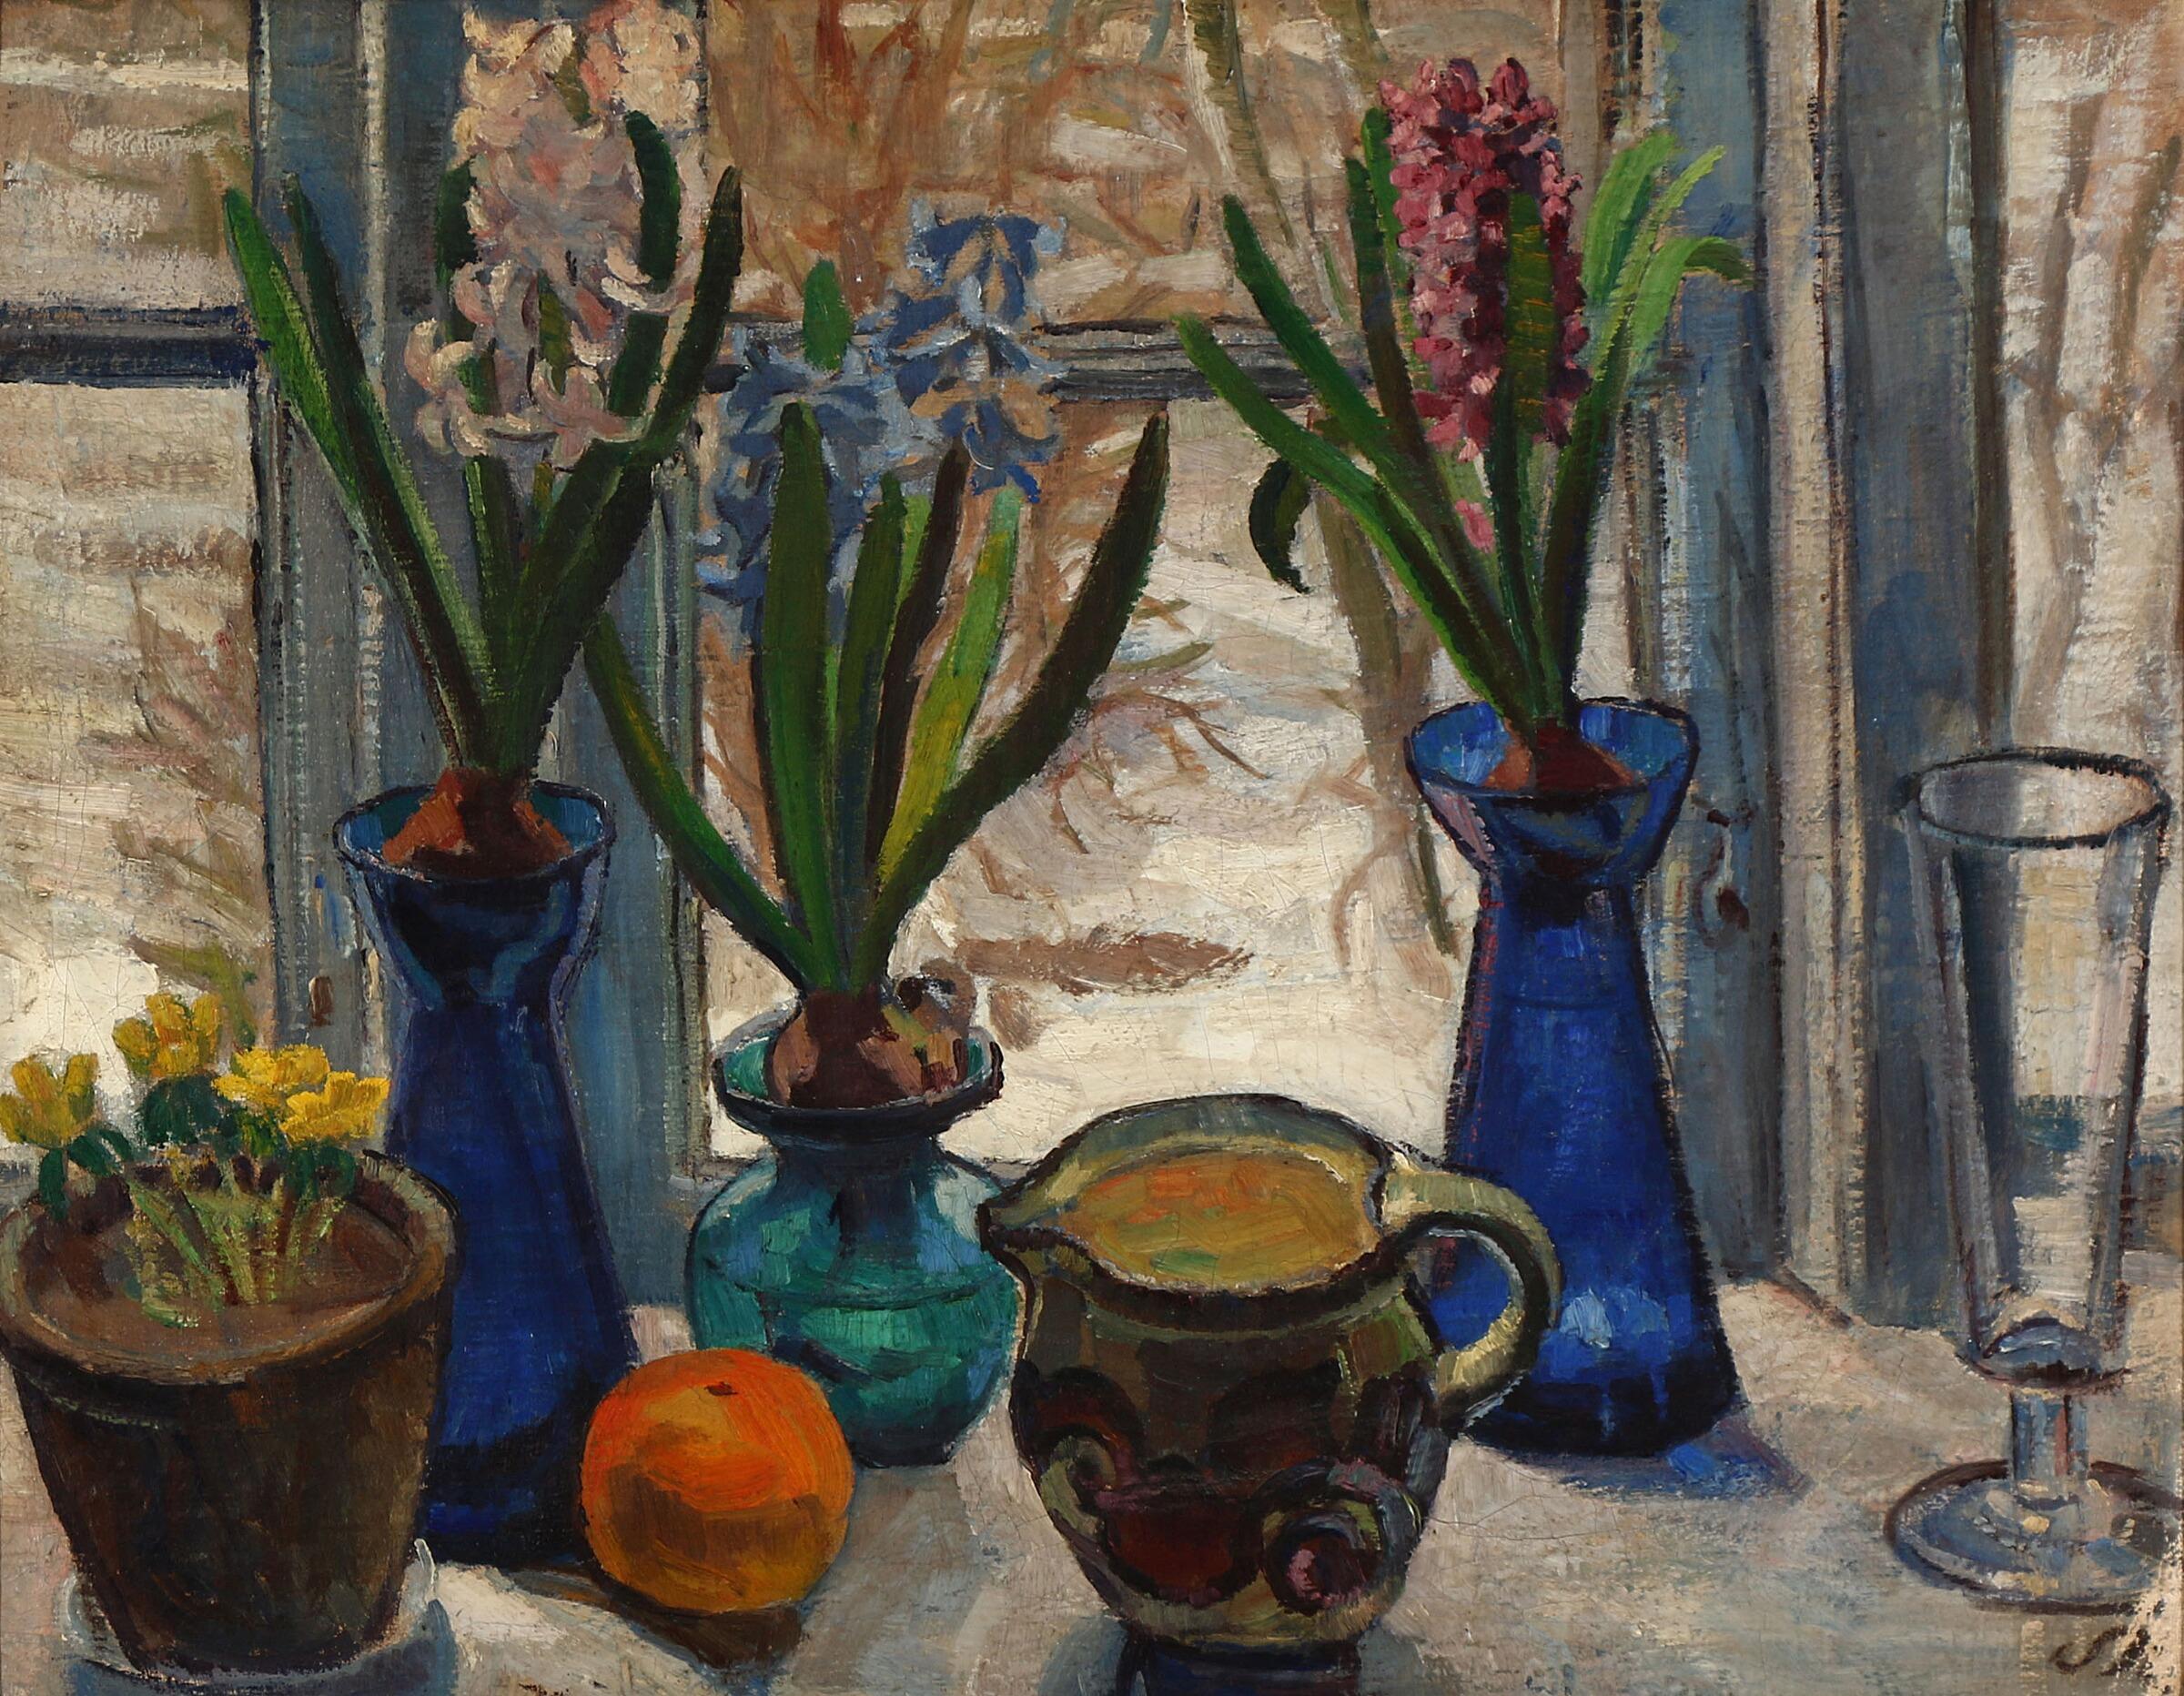 Colorful Danish still-life painting, a favorite subject of flowers on a window sill. Indistinctly signed.
Of the period of Danish modern. Oil on canvas.